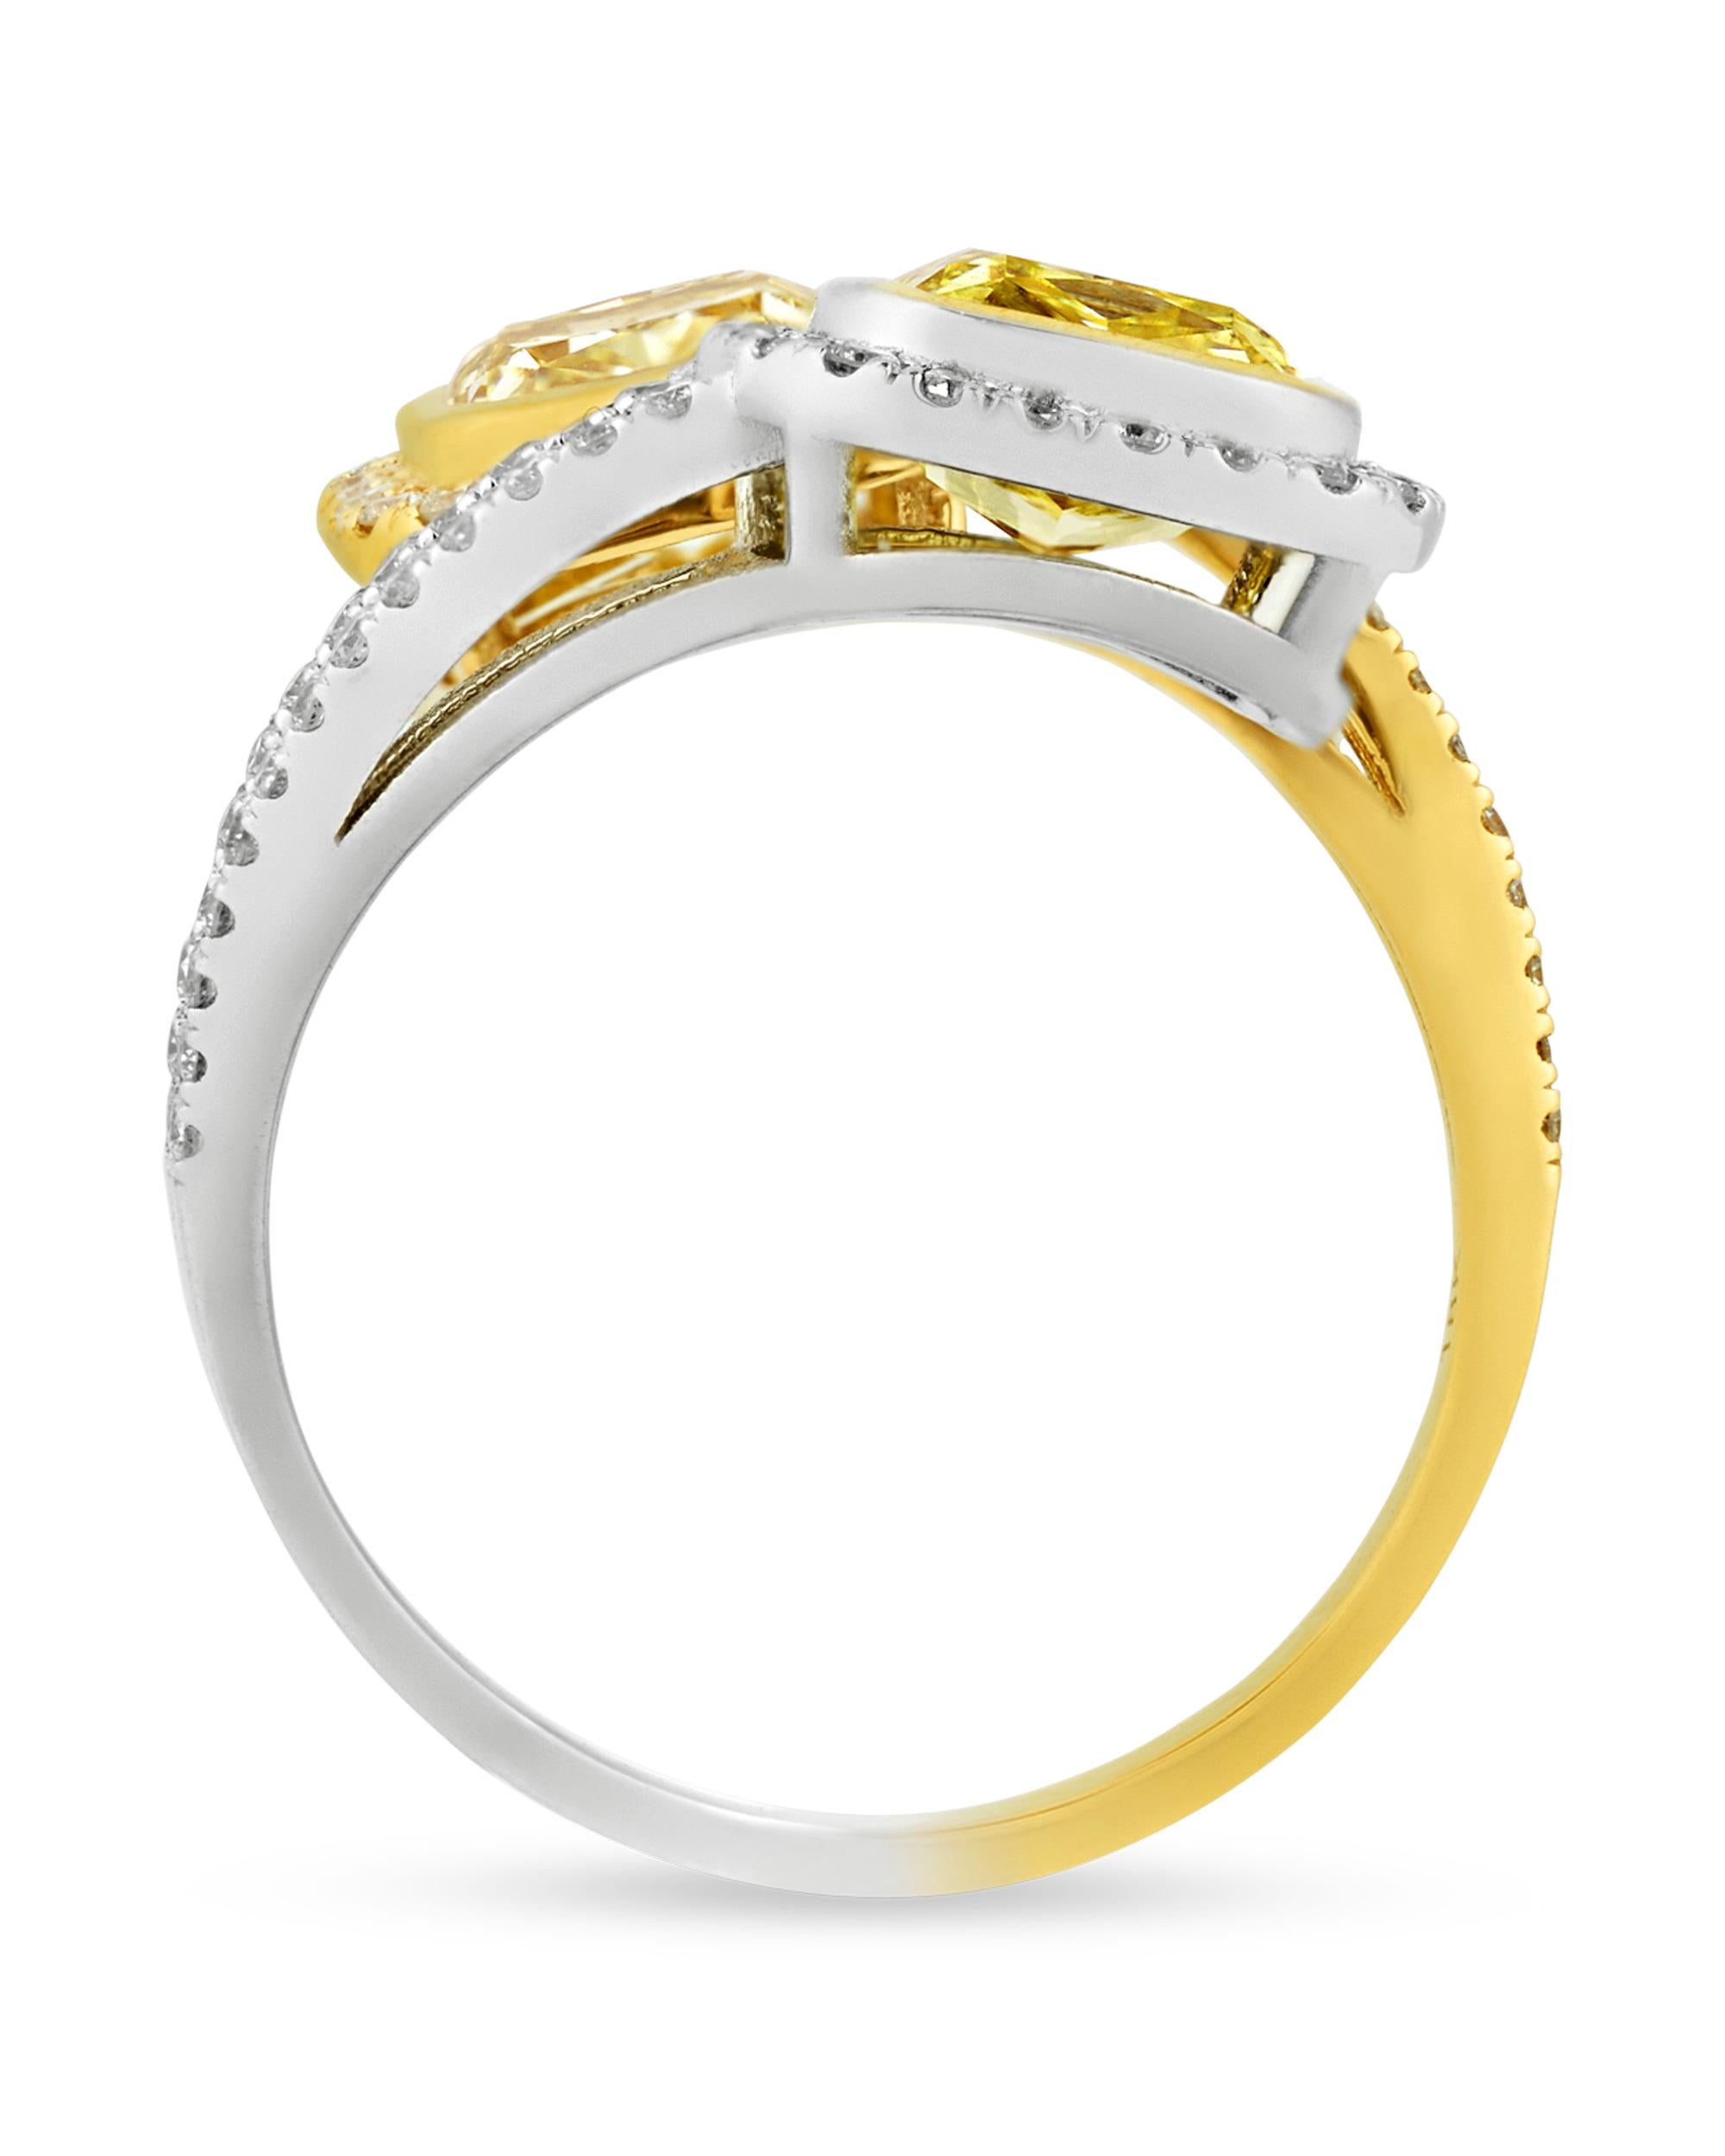 Distinguished for its elegant craftsmanship and exquisite gems, this stunning bypass ring features two striking yellow diamonds totaling 2.40 carats. The sunny diamonds are accented by halos of white diamonds totaling 0.54 carat. The artful bypass